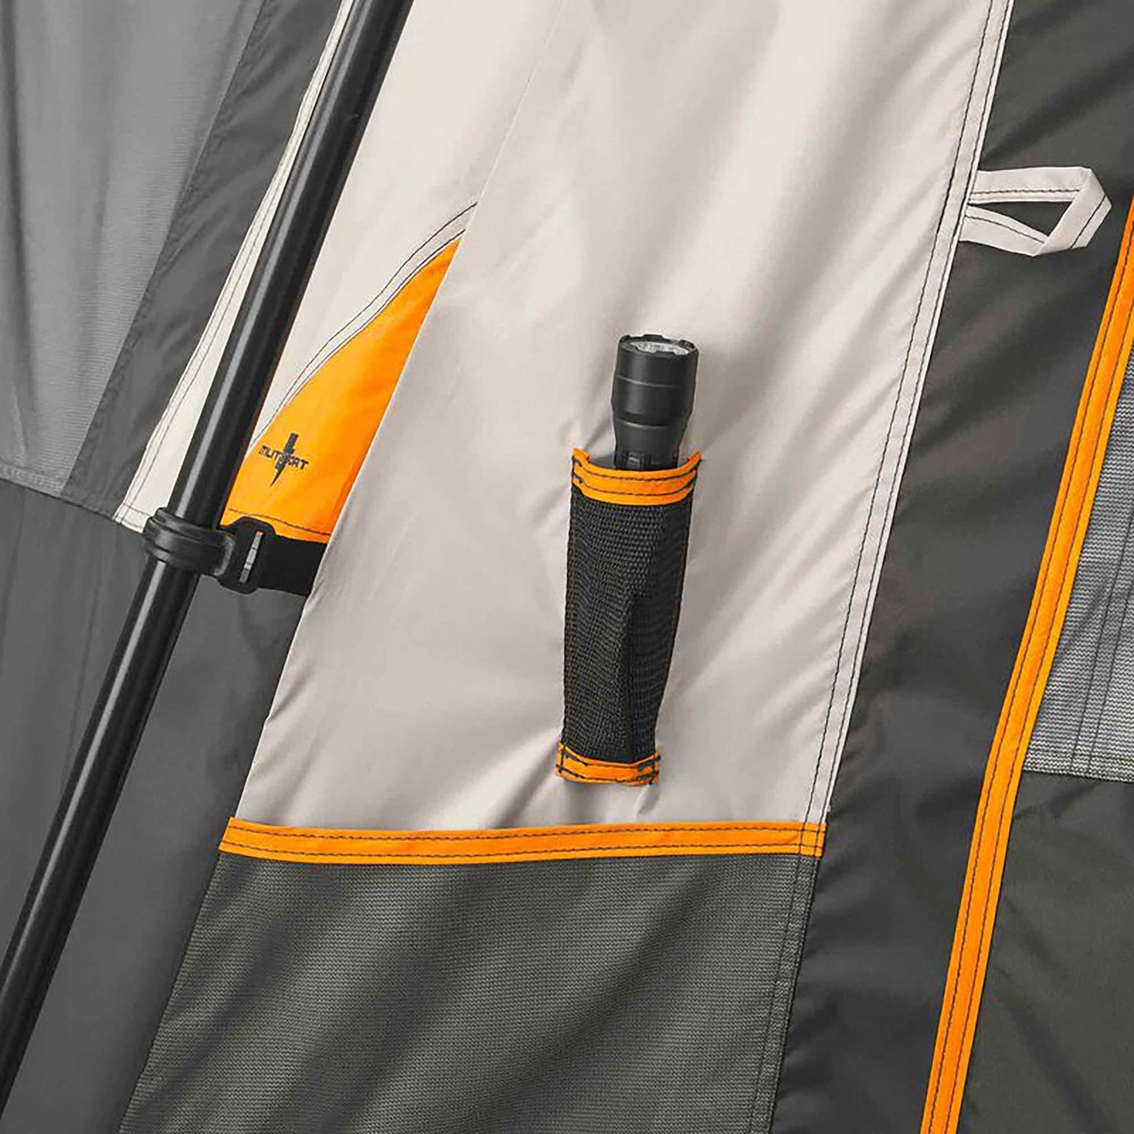 Bushnell 12P Outdoorsman Instant Cabin Tent - Image 9 of 10